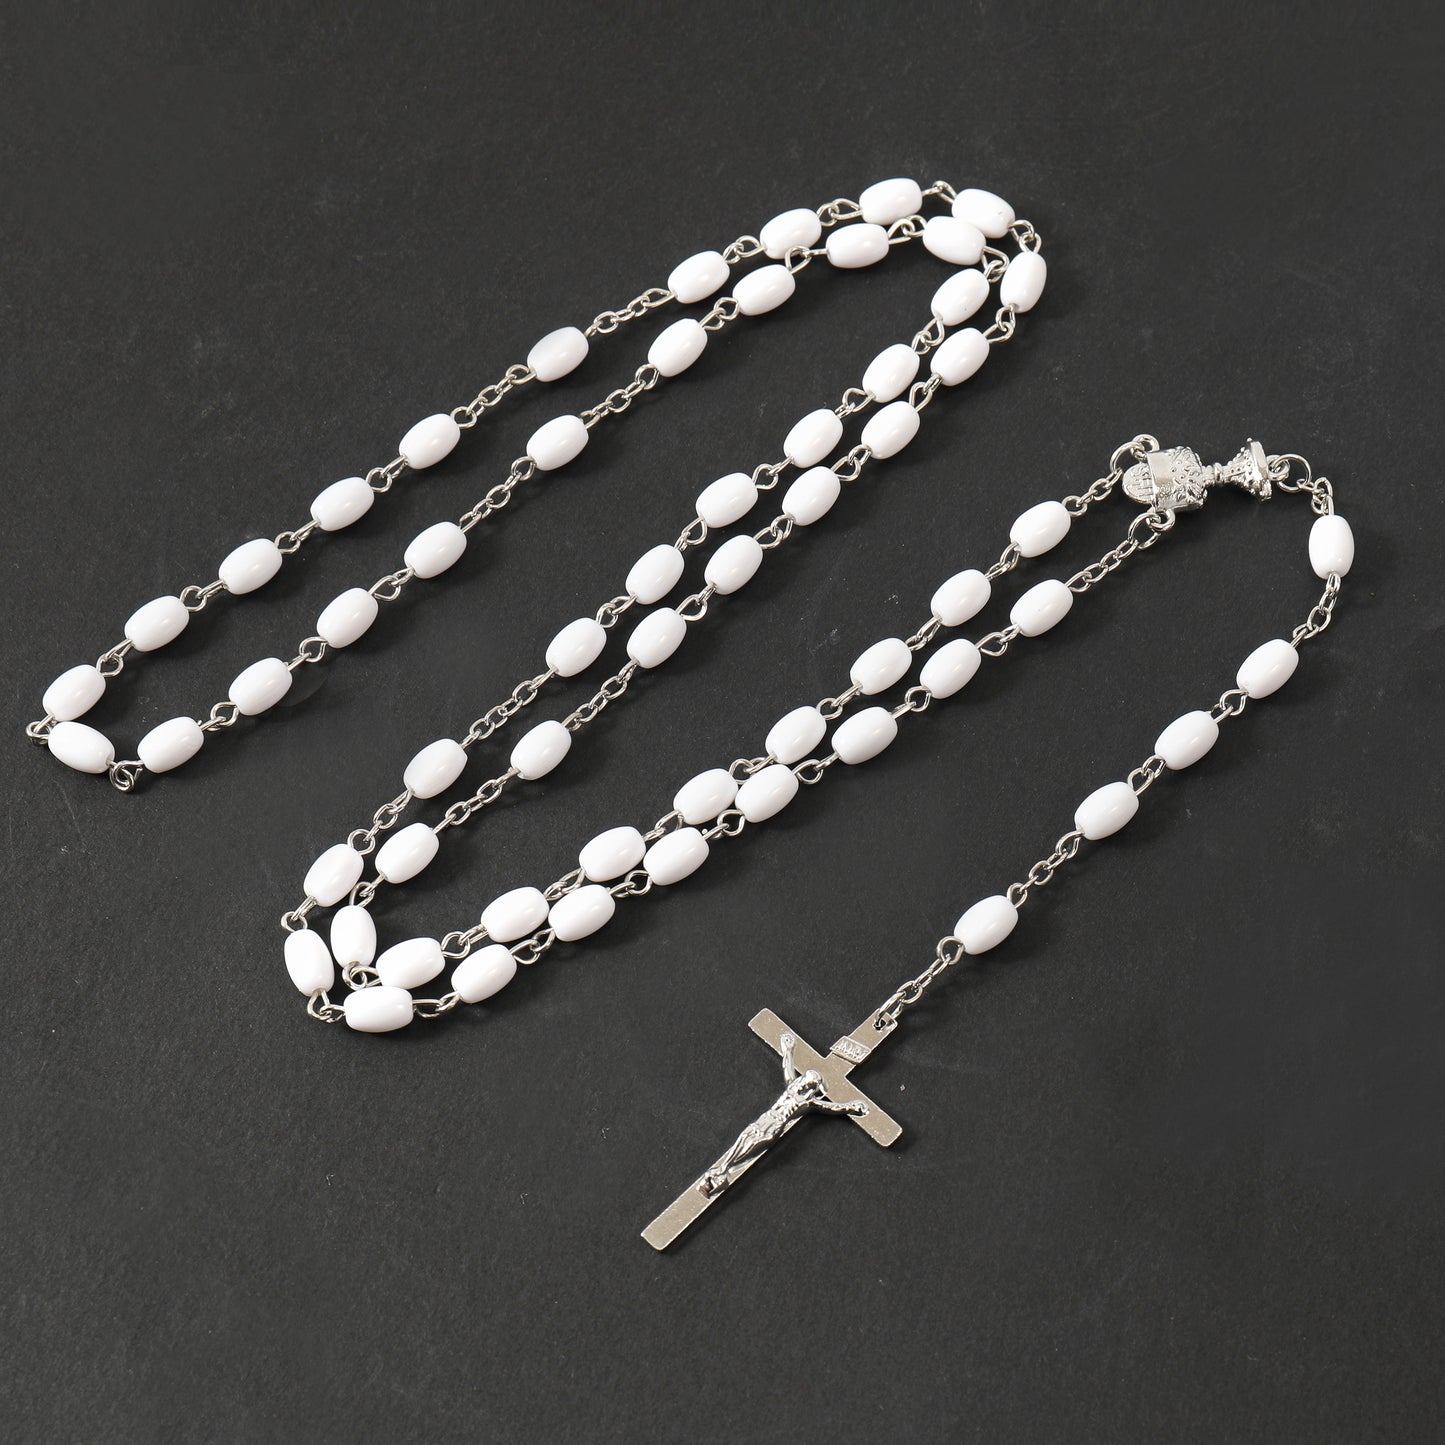 Silver and White Rosary with Cross - Rivendell Shop